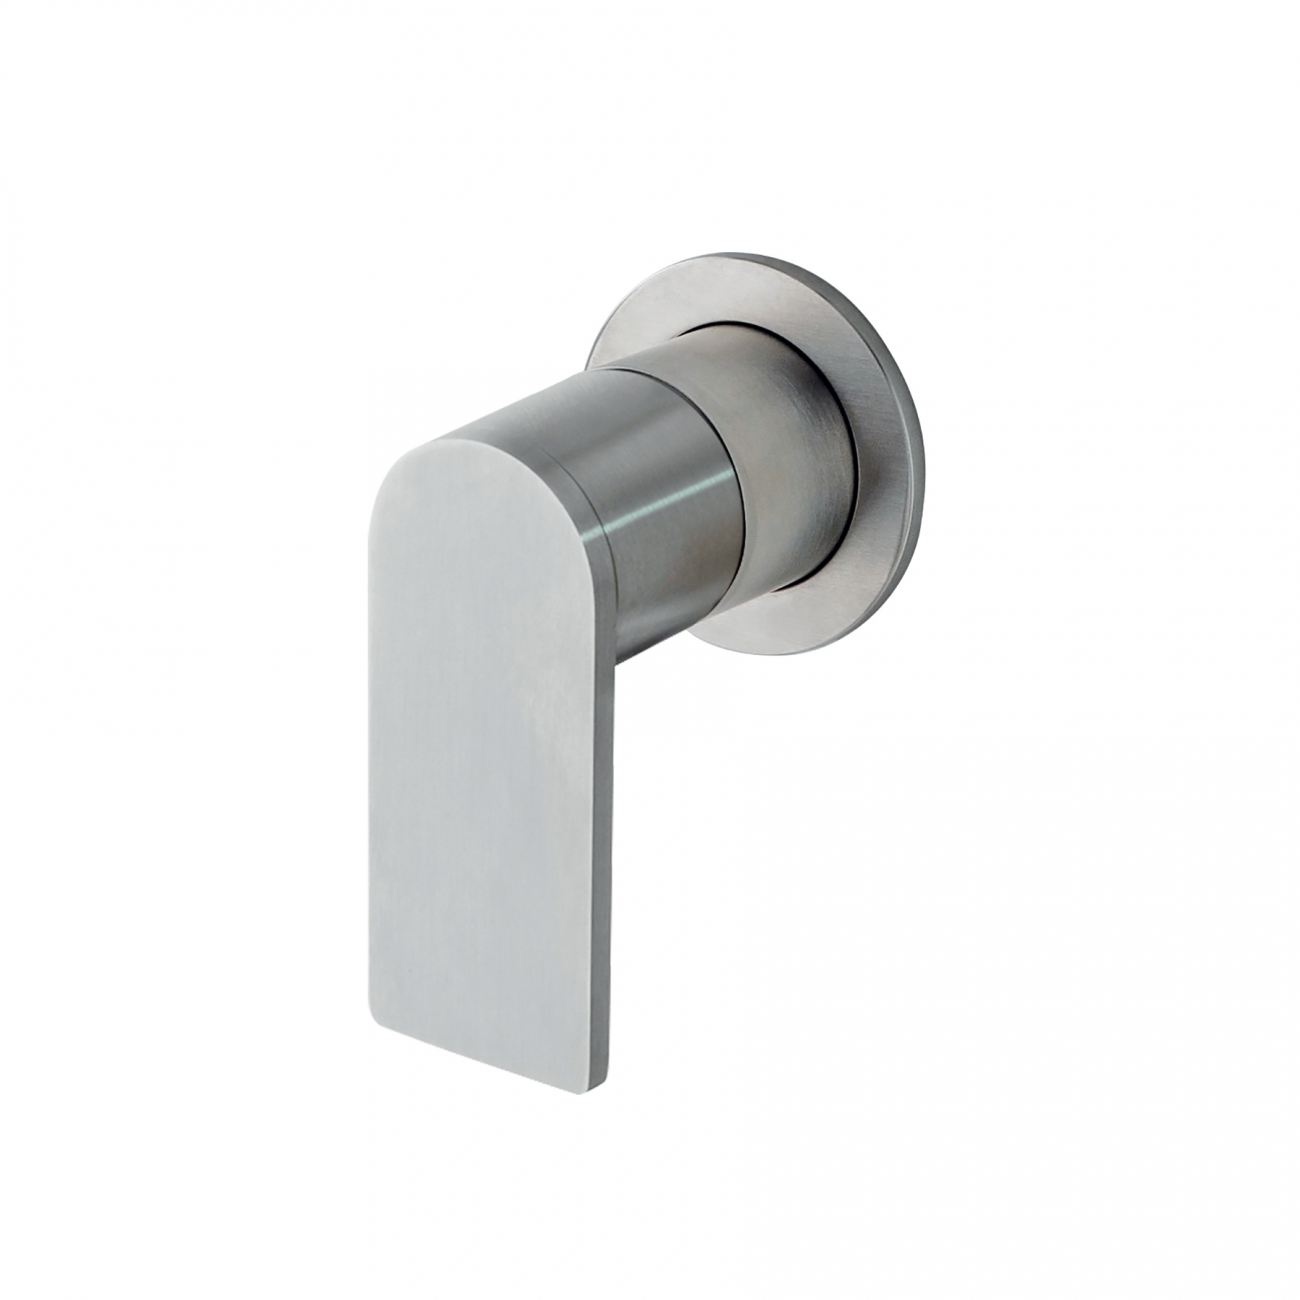 Treemme 3.6 wall-mounted mixer